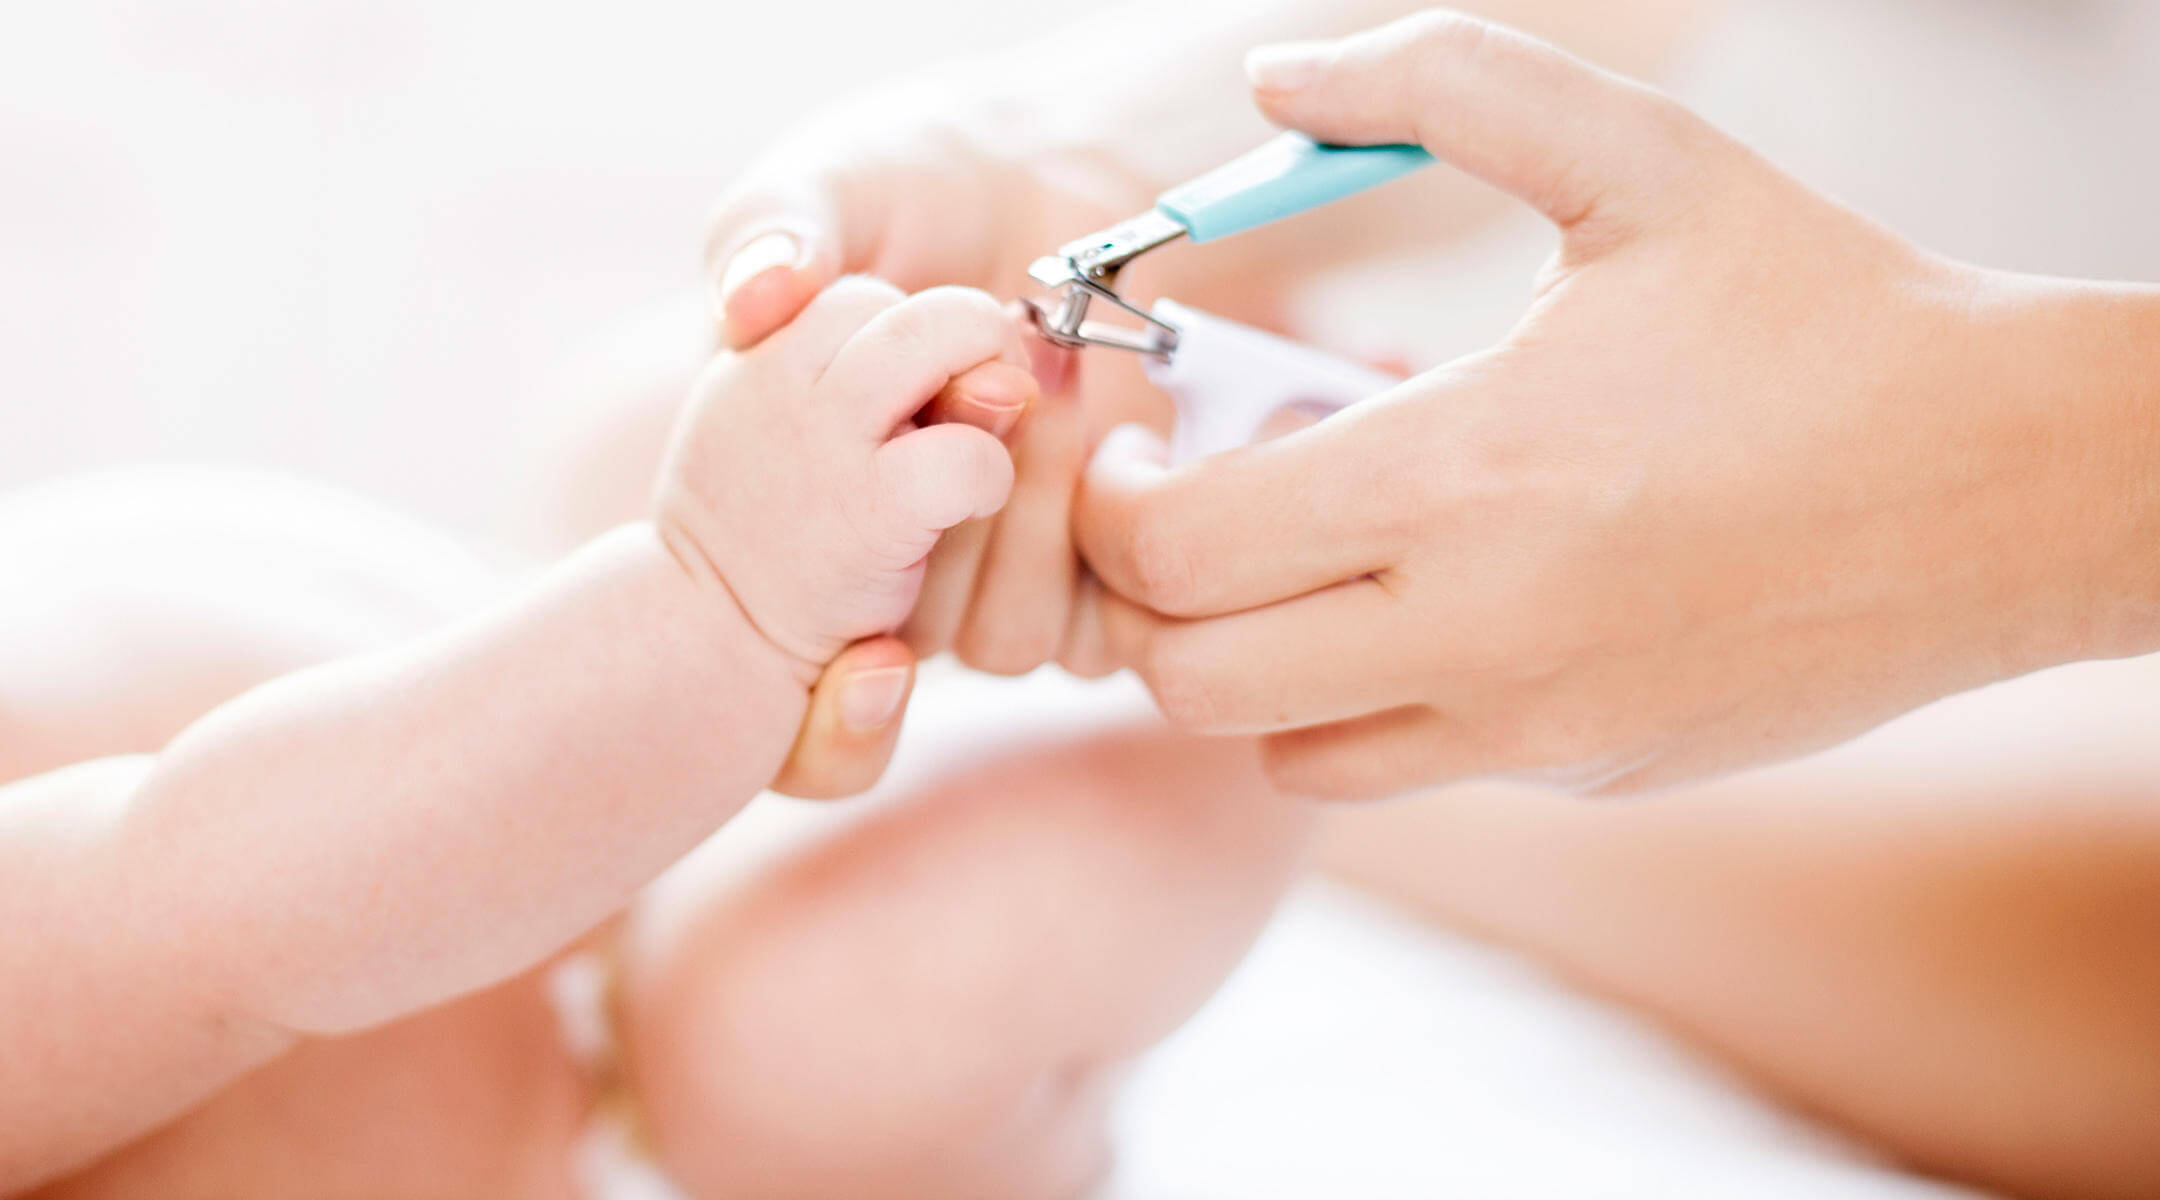 Tips to Take Care of Your Toddler’s Nails